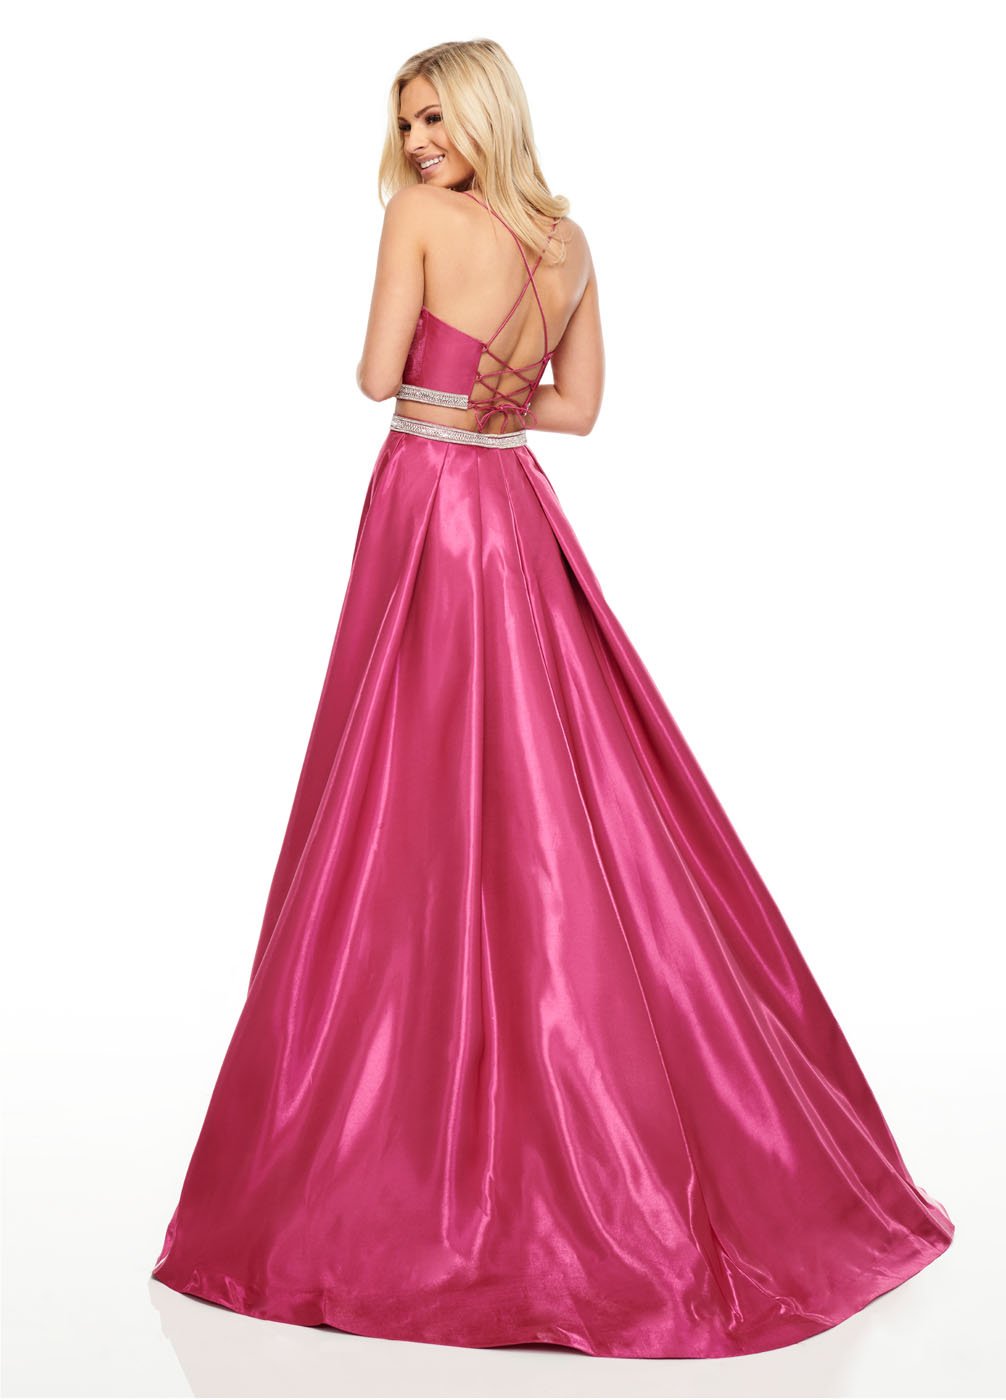 Rachel Allan 7106 dress images in these colors: Magenta, Navy, Red.